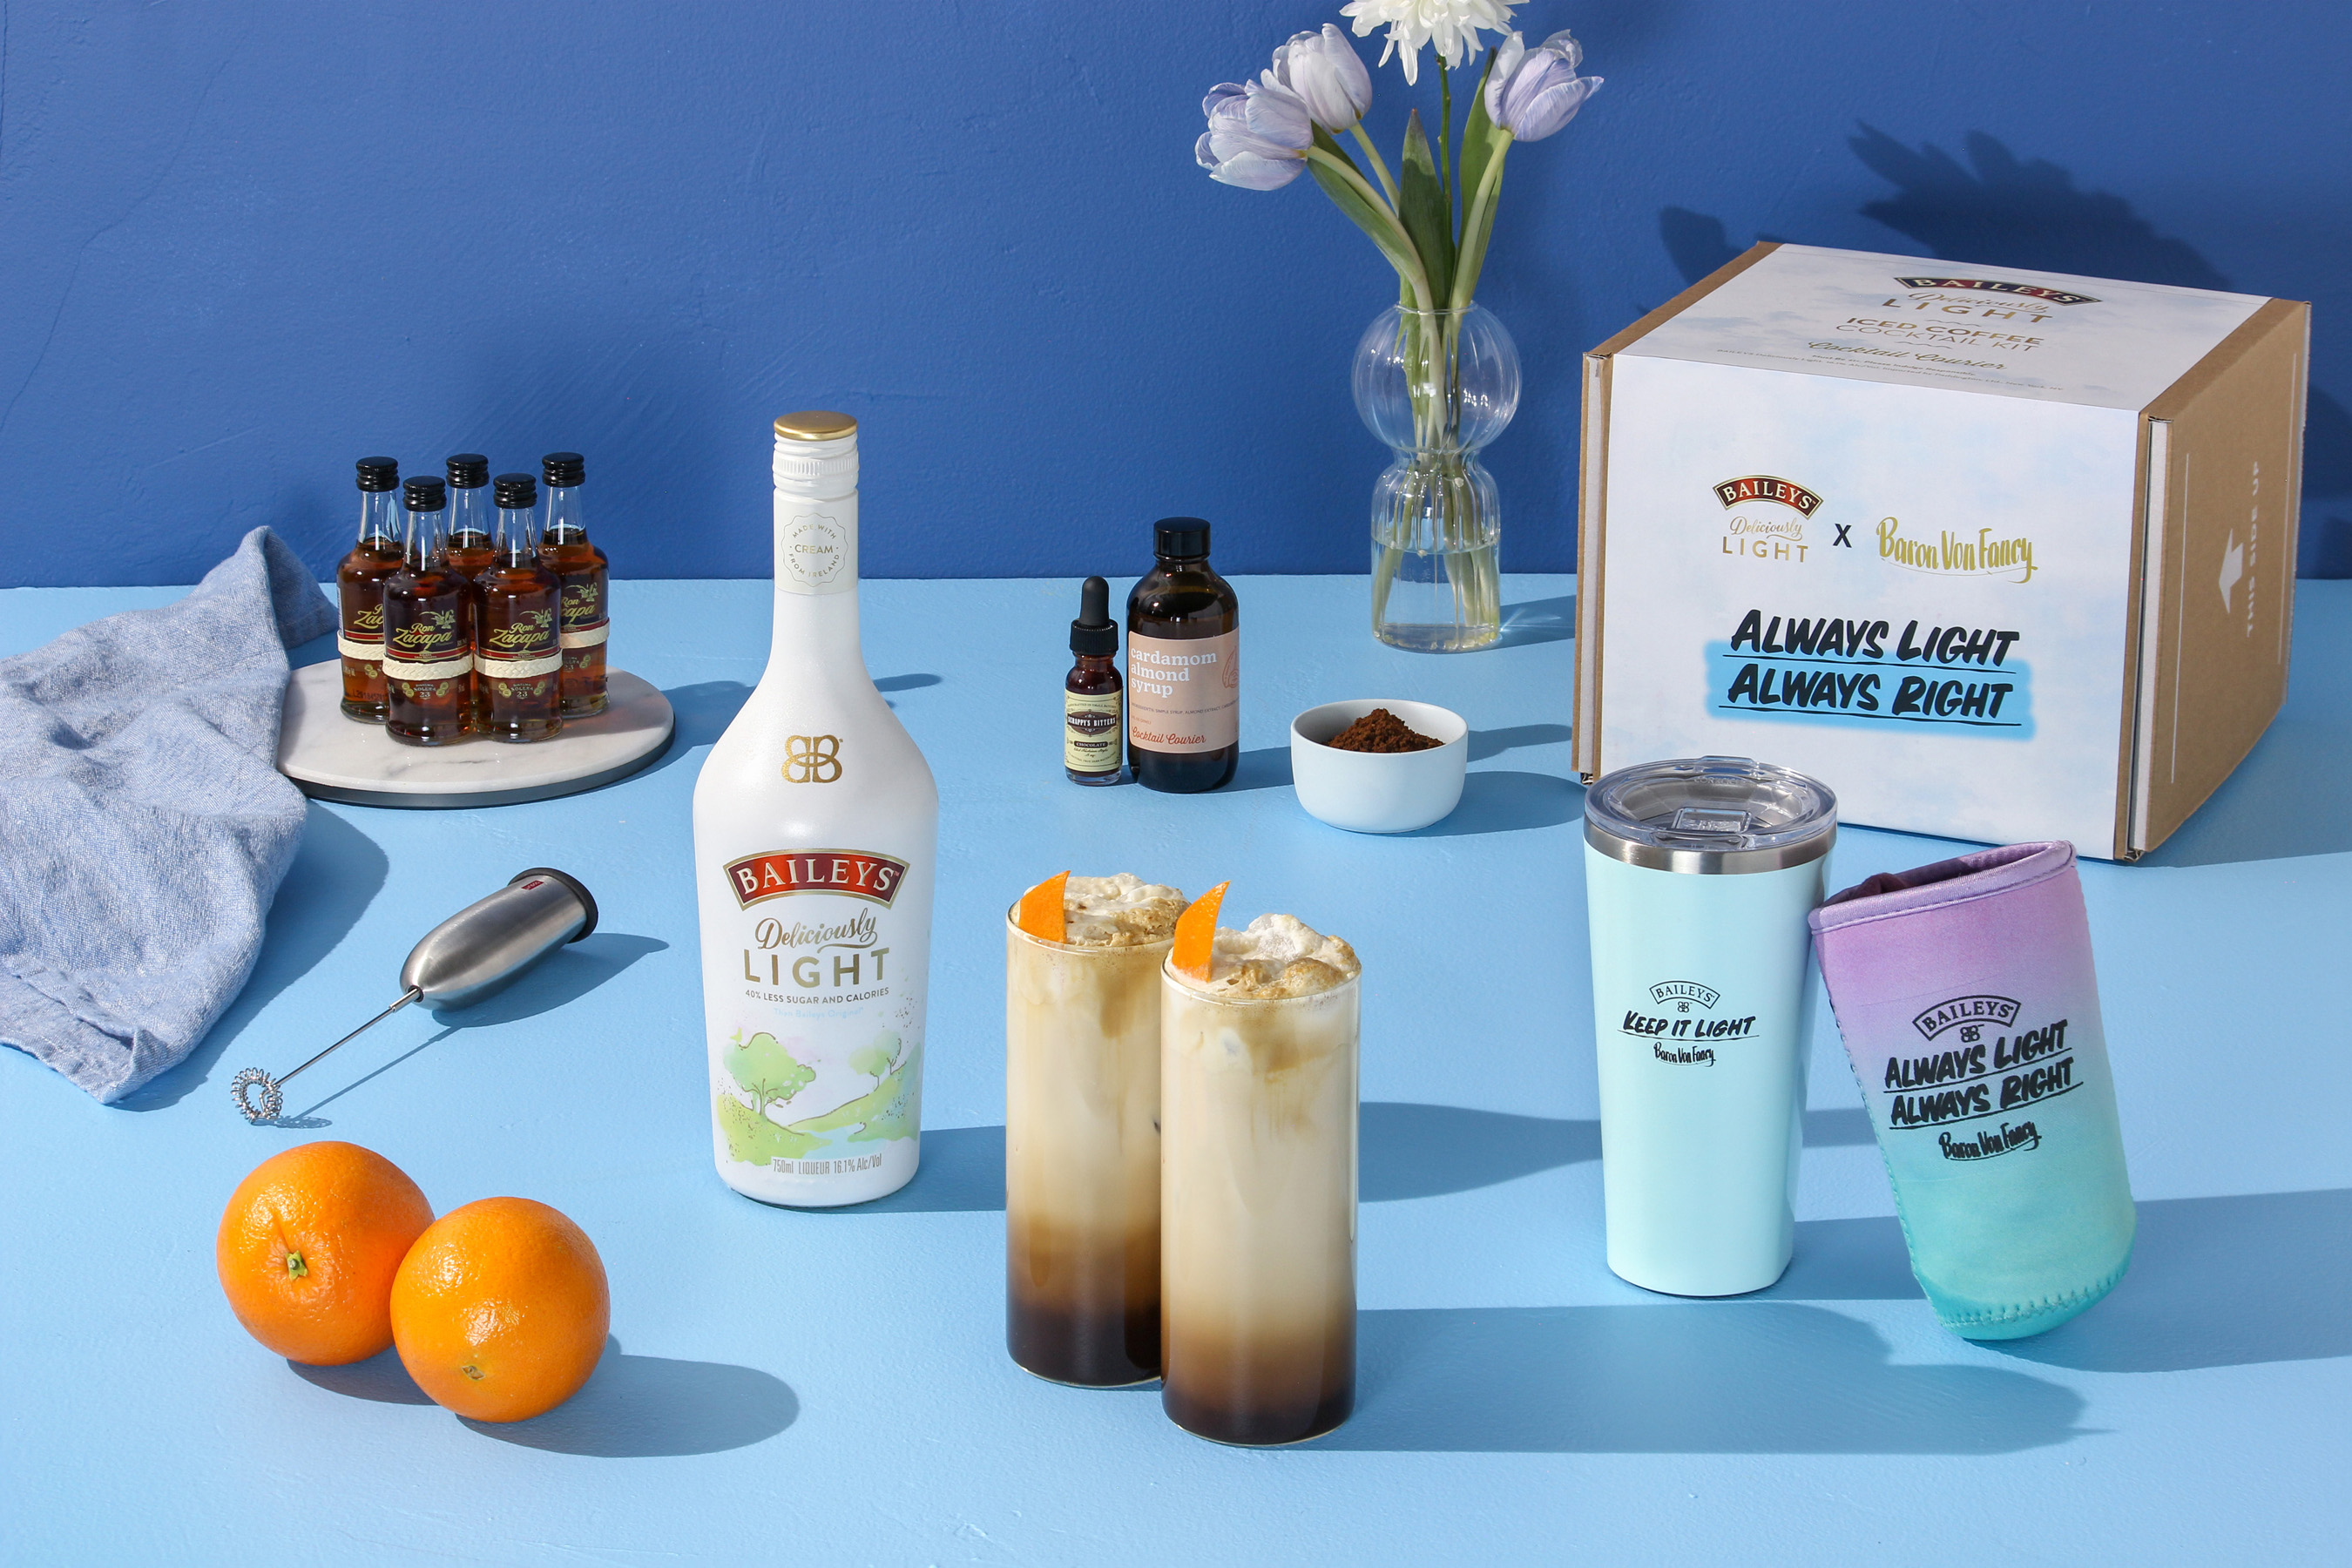 Enjoy a special message from Baron Von Fancy by sipping on a cocktail at home with friends and family with the Always Light, Always Right Cocktail Courier Kit suited for year-round iced coffee aficionados (you know who you are!).